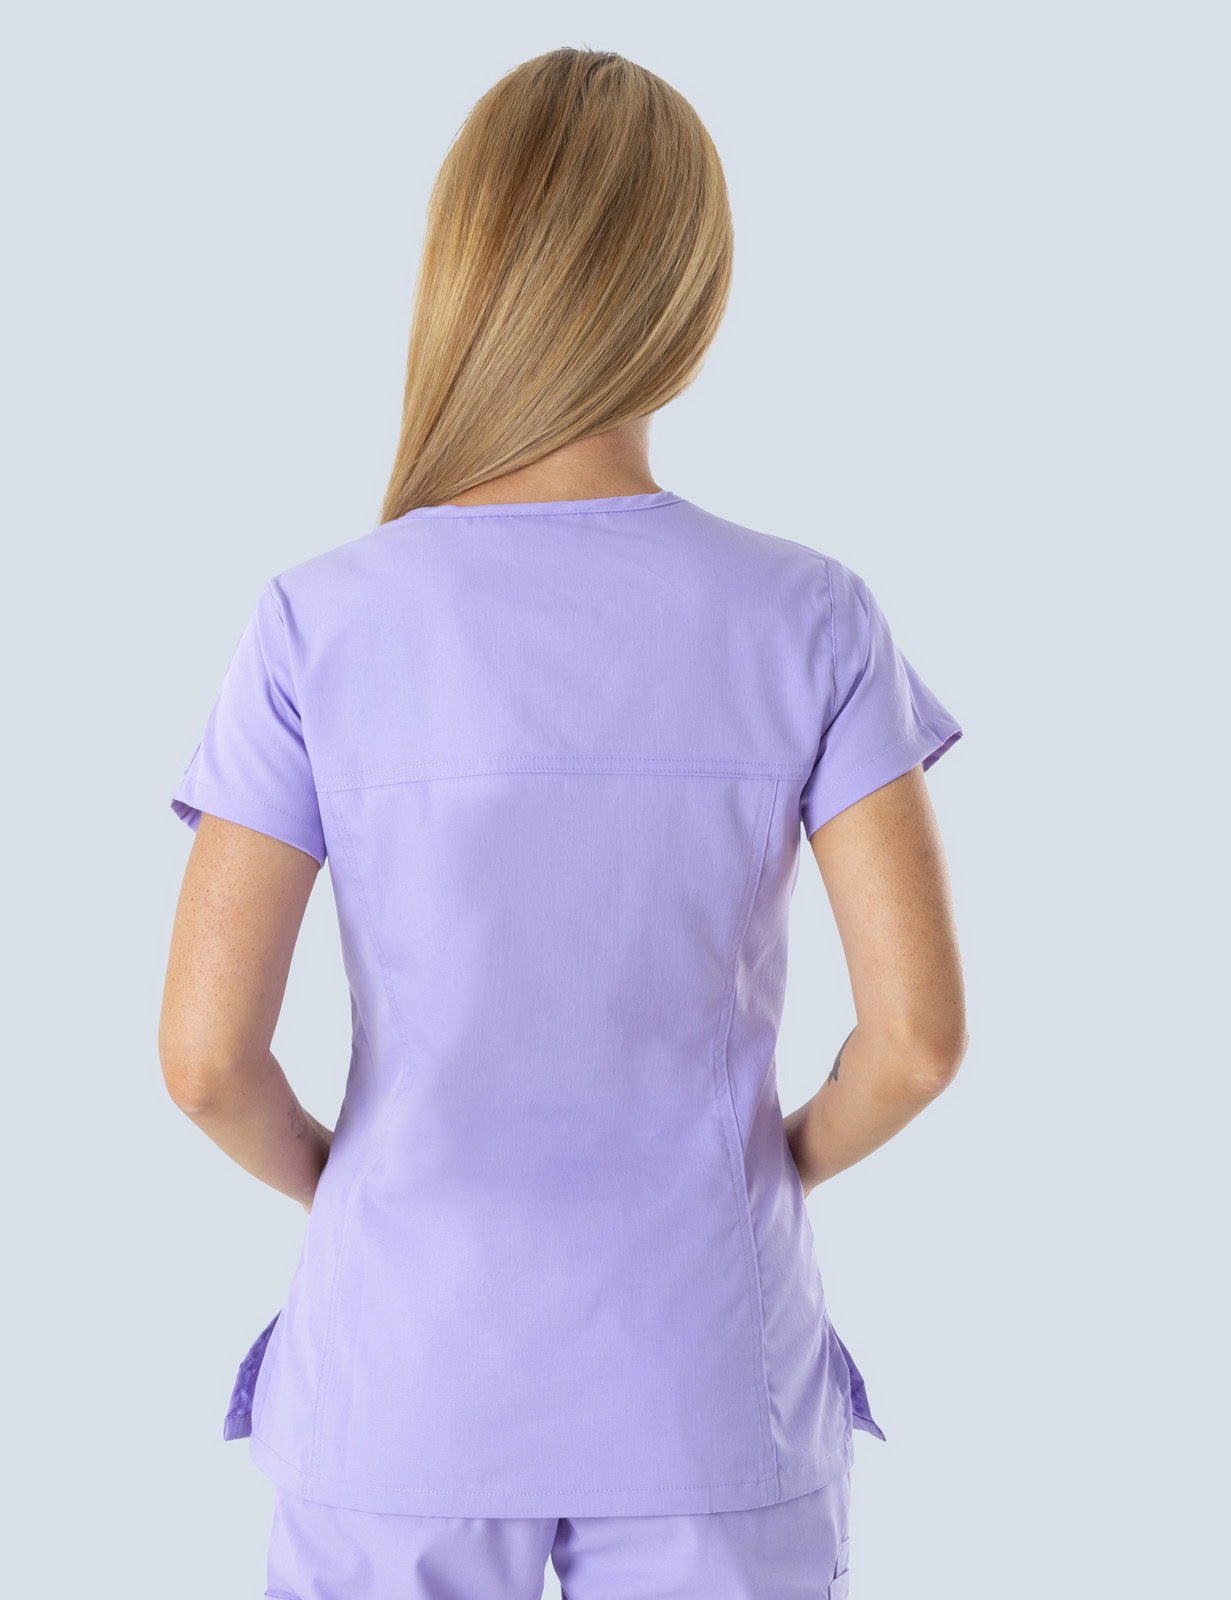 Women's Fit Solid Scrub Top - Lilac - 2X Large